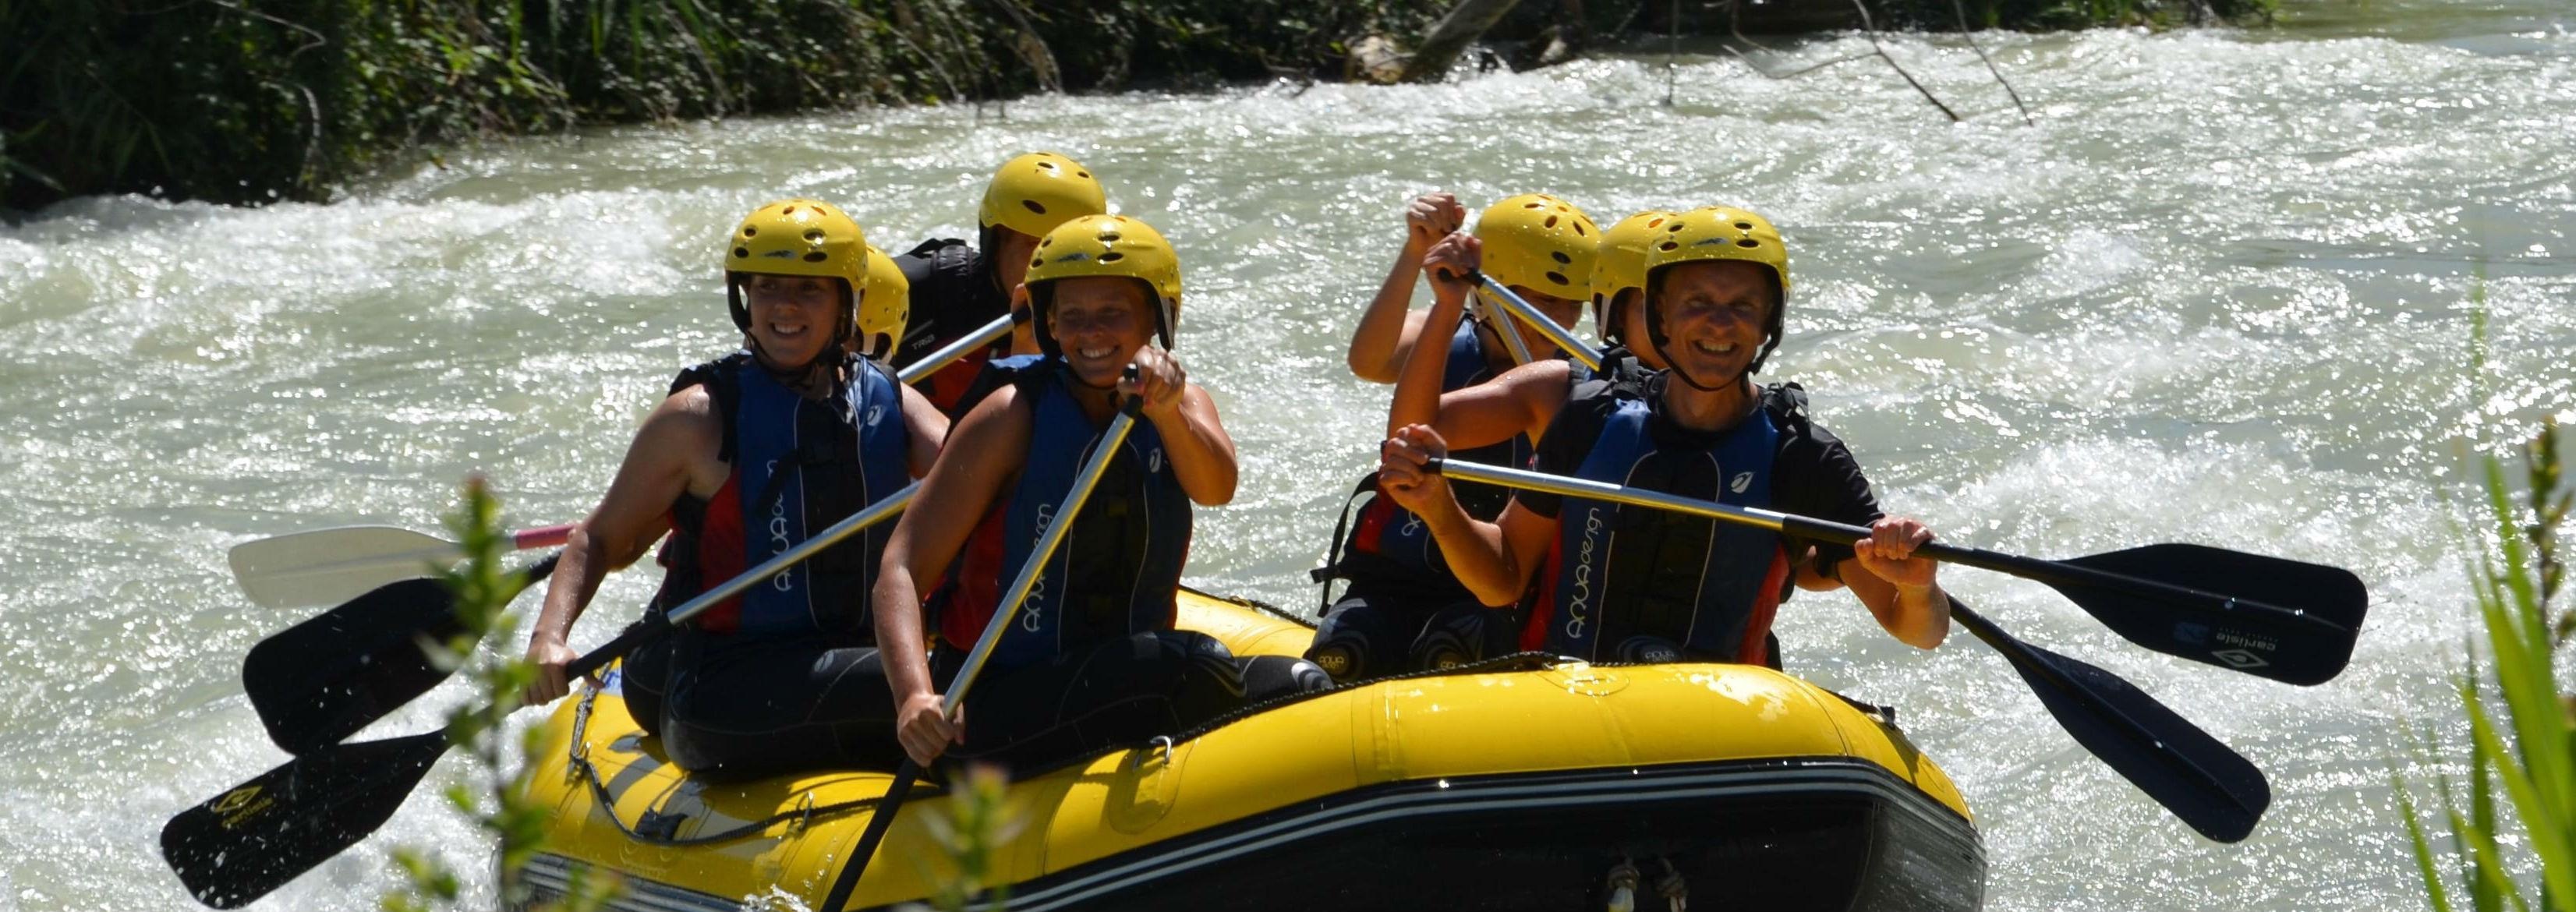 Rafting: Recreational boating activity, Class 1-2 whitewater difficulty that requires basic skills. 3310x1170 Dual Screen Background.